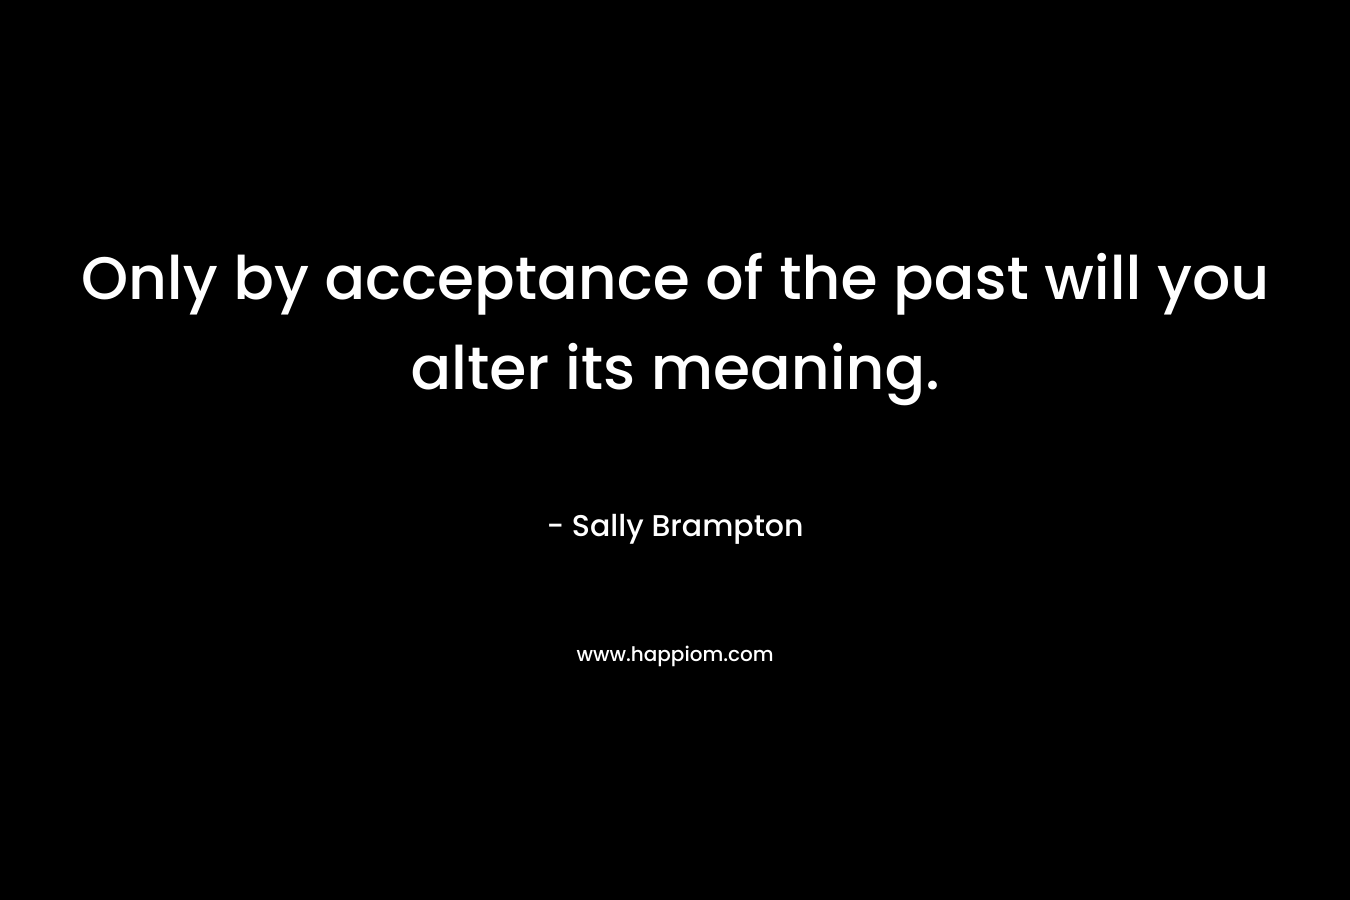 Only by acceptance of the past will you alter its meaning. – Sally Brampton